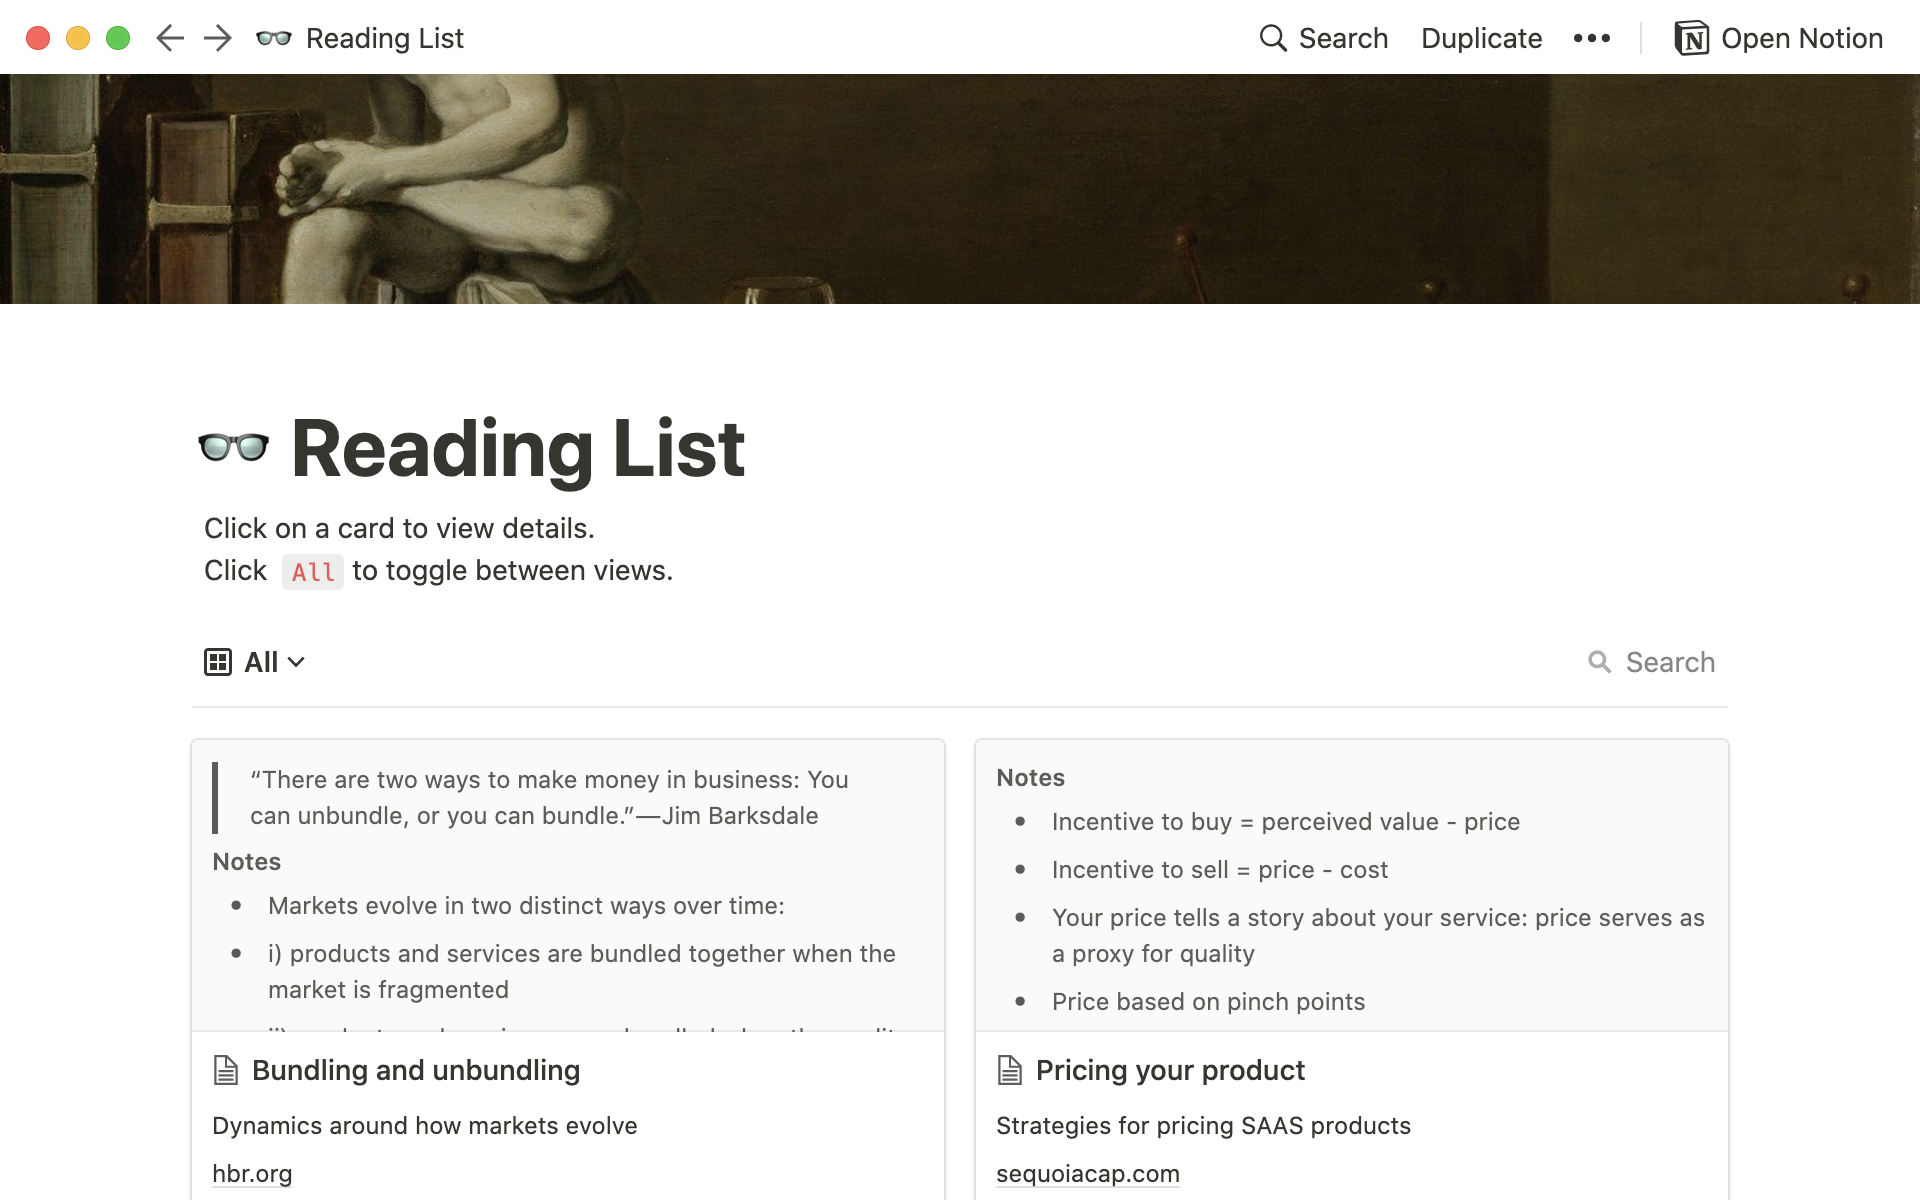 The desktop image for the Reading list template